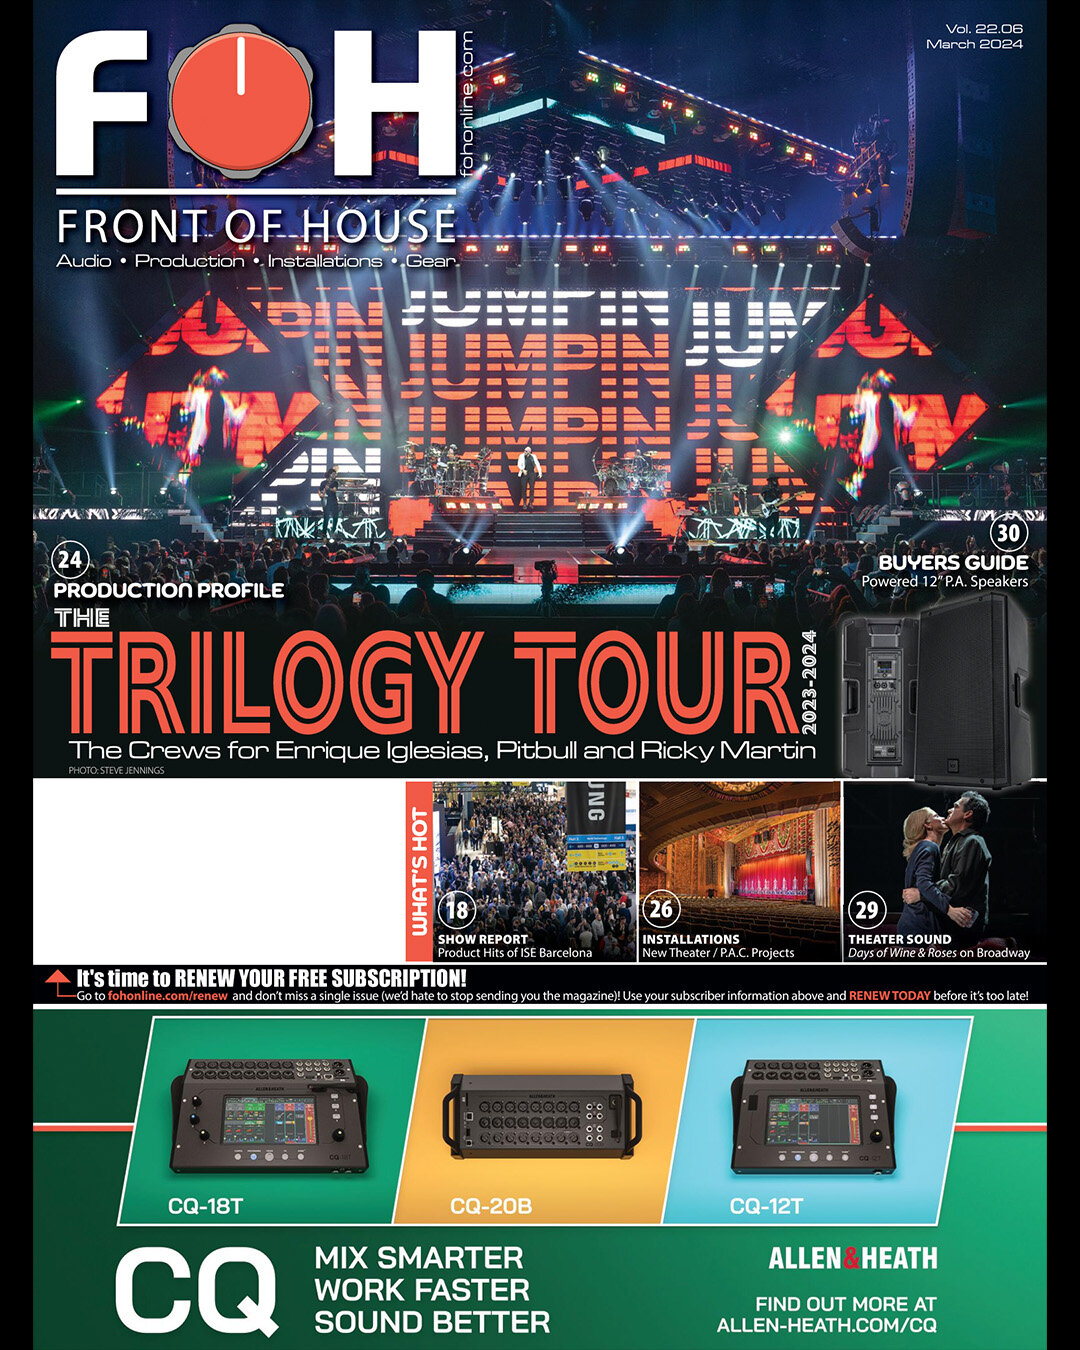 Great Production Profile on the Trilogy Tour in Front of House's March Issue. Congratulations to the whole team, and fantastic work!

👏 Bonus applause to the Integration team for their front page coverage on the #MeyerSound installation at the beaut